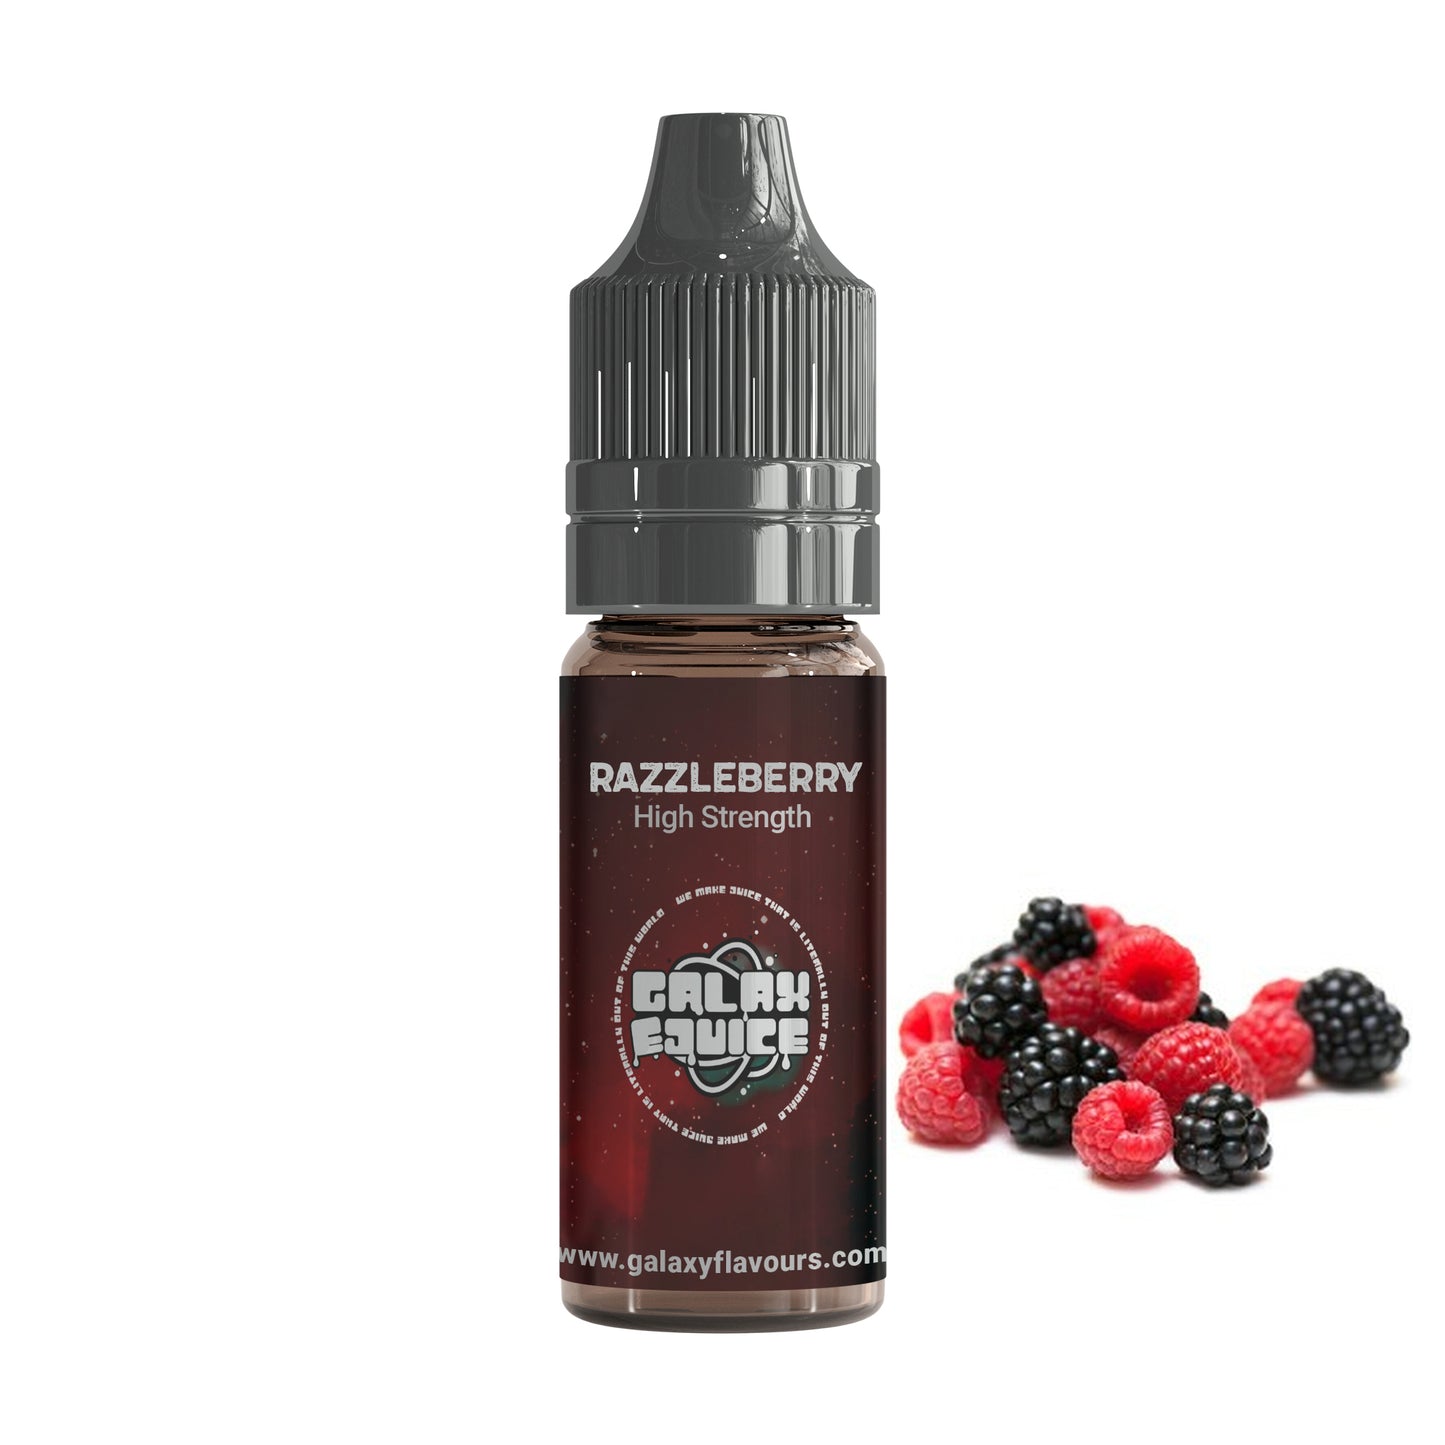 Razzleberry High Strength Professional Flavouring.